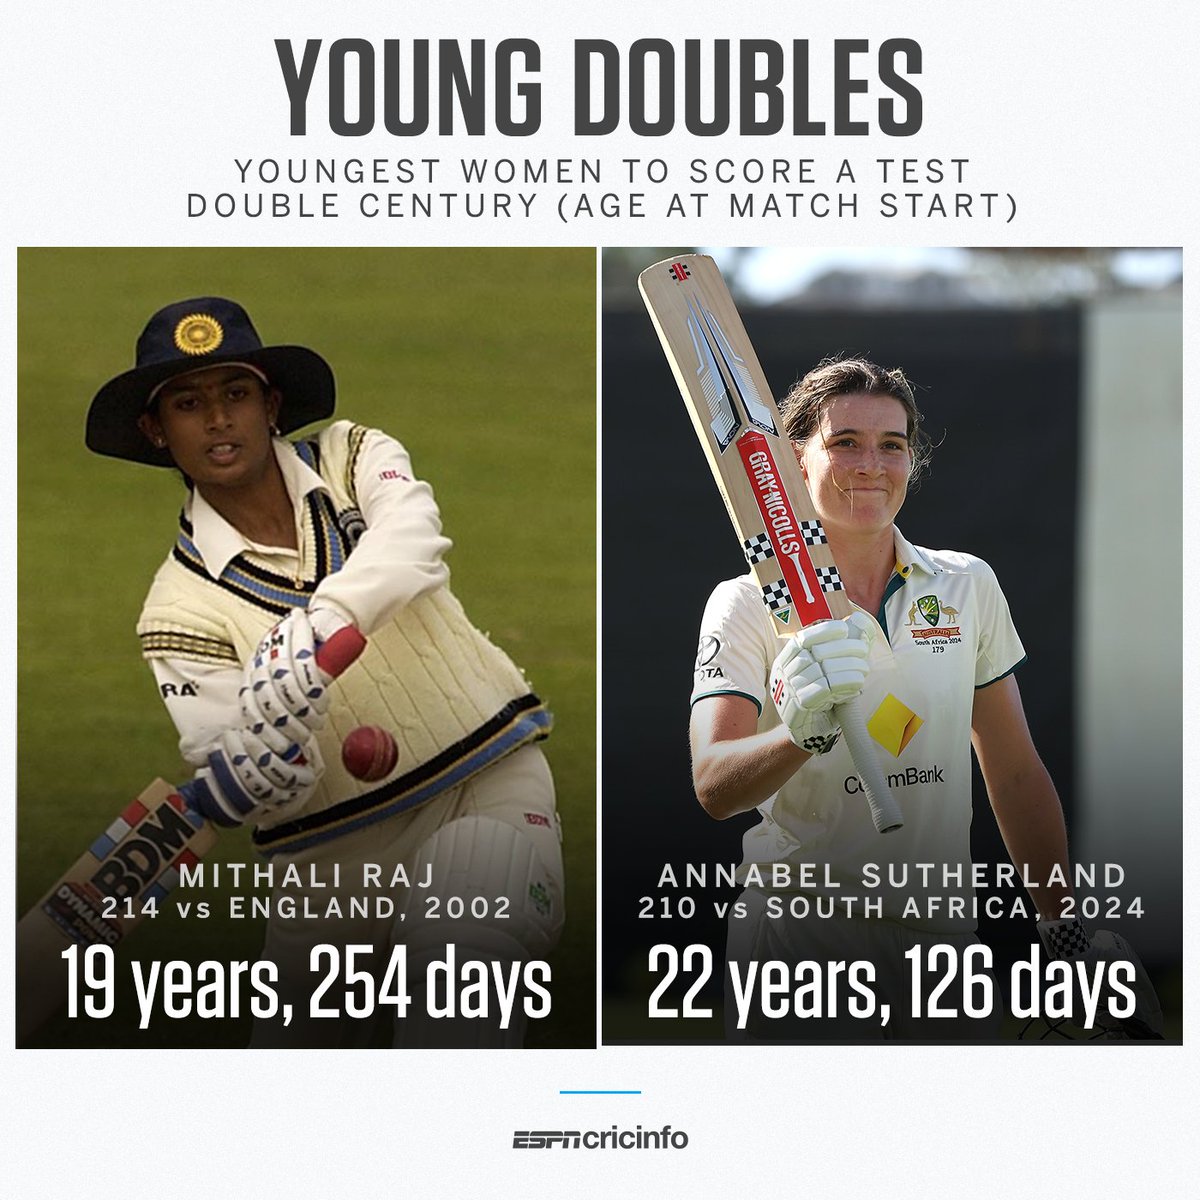 Only Mithali Raj has scored a double century in women's Test at a younger age than Annabel Sutherland ✨ #AUSvSA